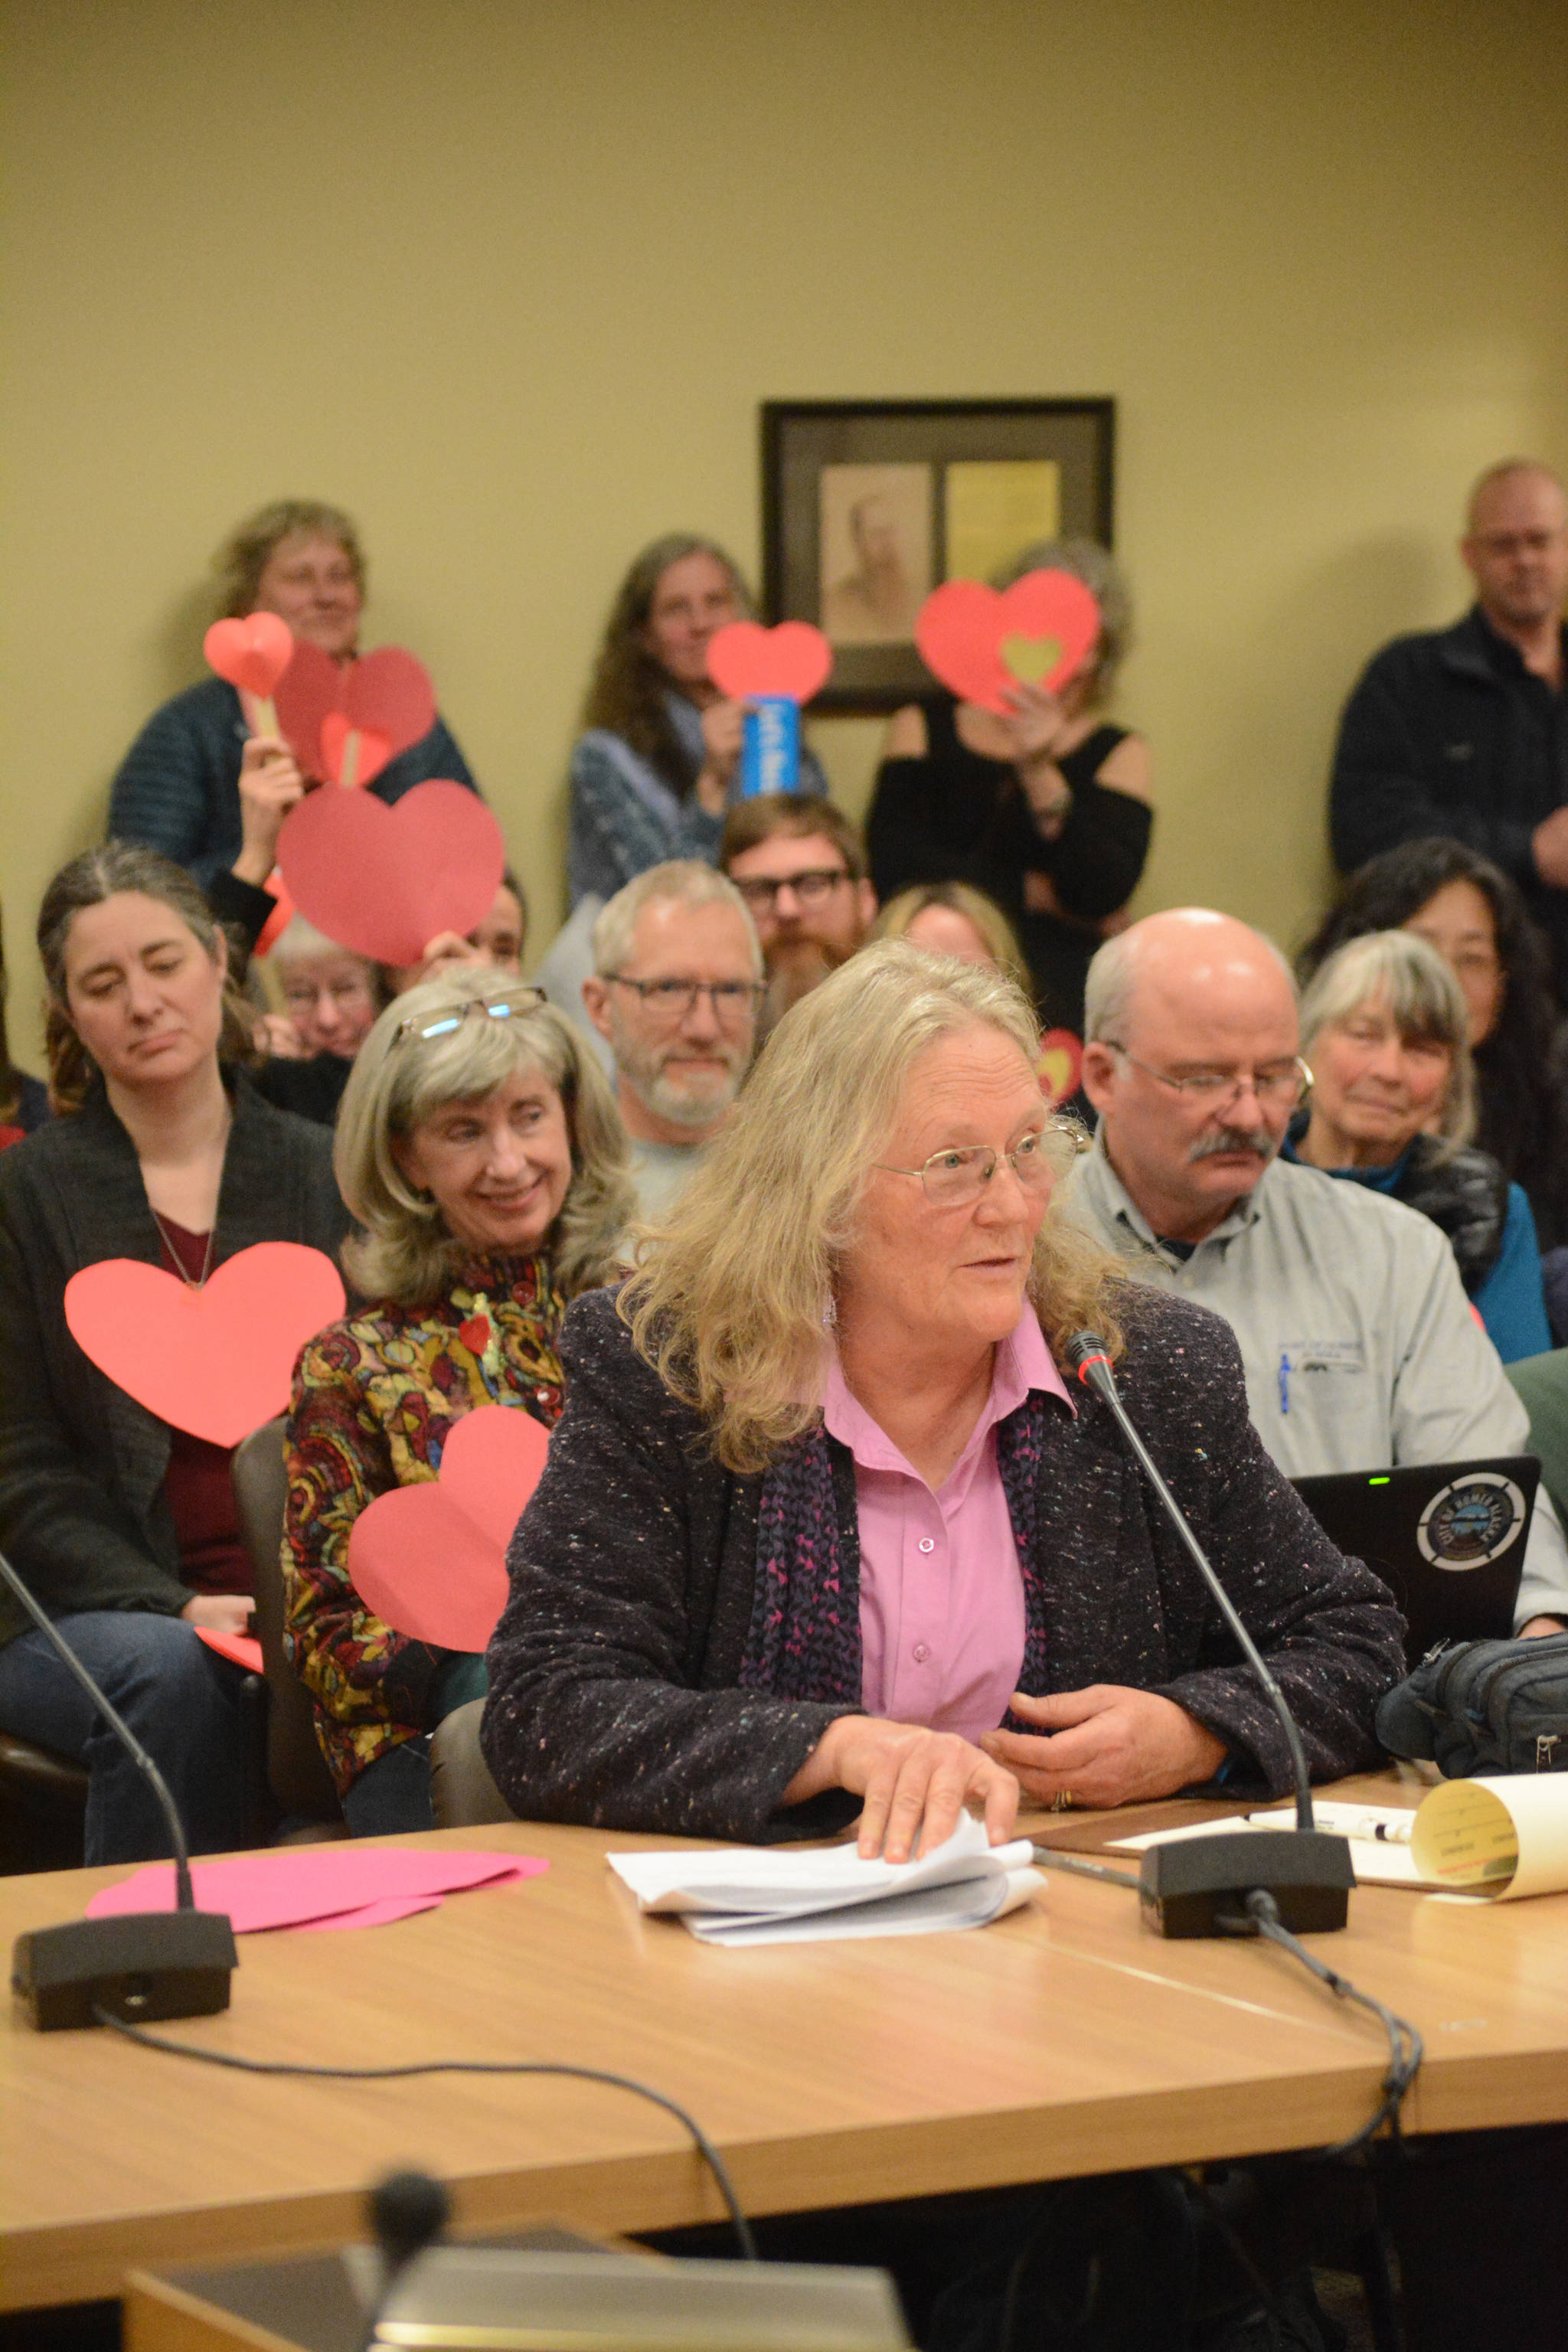 At the Homer City Council meeting on March 28, Poppy Benson speaks in support of council members Donna Aderhold, David Lewis and Catriona Reynolds, the targets of a movement to recall them. Many of the 100 people attending Tuesday's meeting held paper hearts to show support for the three council members. One woman held a sign that said, "Let's recall hatred." Recall organizers have targeted the three because they sponsored Resolution 17-019, the inclusivity resolution. "I would hate to think any faction in our city would go after you," Benson said to Aderhold, Lewis and Reynolds. "It is very unfortunate the city is going to be put through this. I would like to express my support for all three of you who are the target of a vicious action." Tess Dally also spoke in support of the three council members as well as the council and the mayor.  "Three of you have made a difficult decision that really ended up taking a risk, taking a risk for people on the margin," Dally said of Aderhold, Lewis and